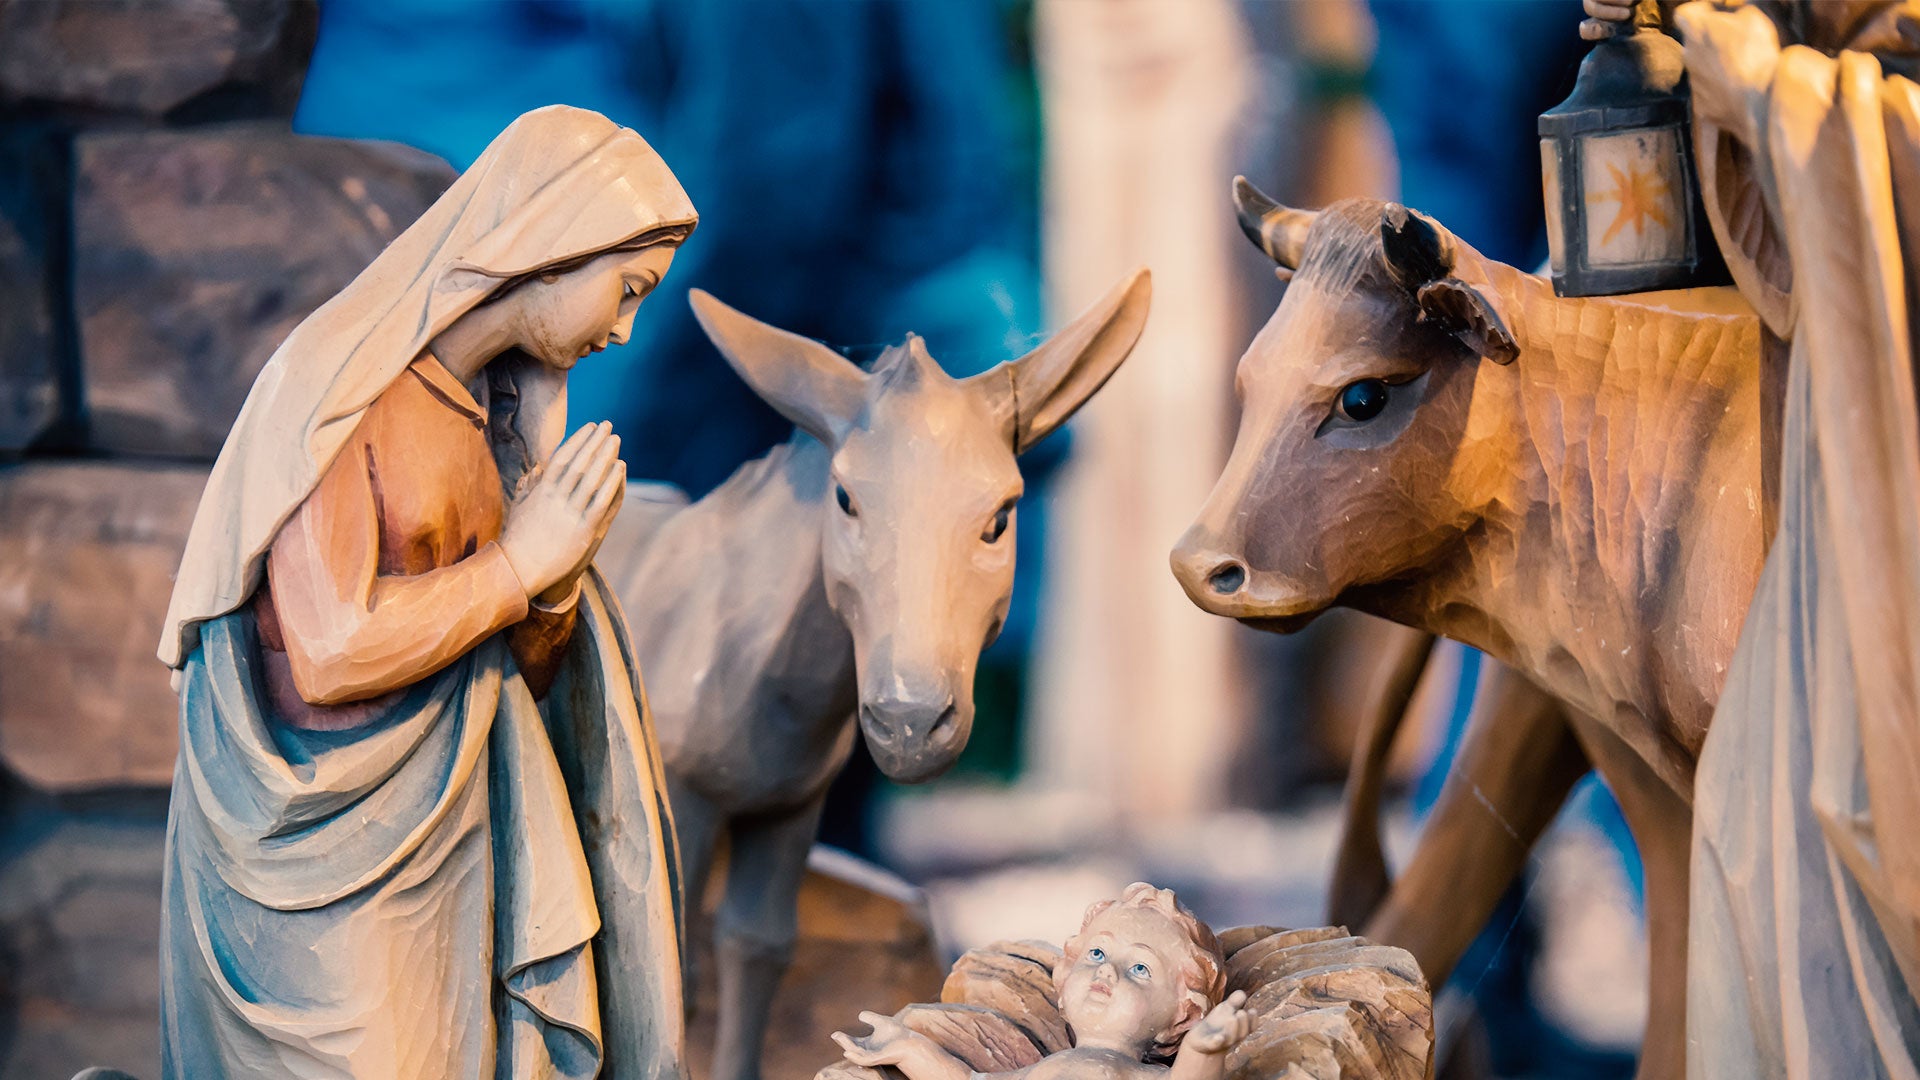 2023 Marks 800th Anniversary of First Recreation of the Nativity